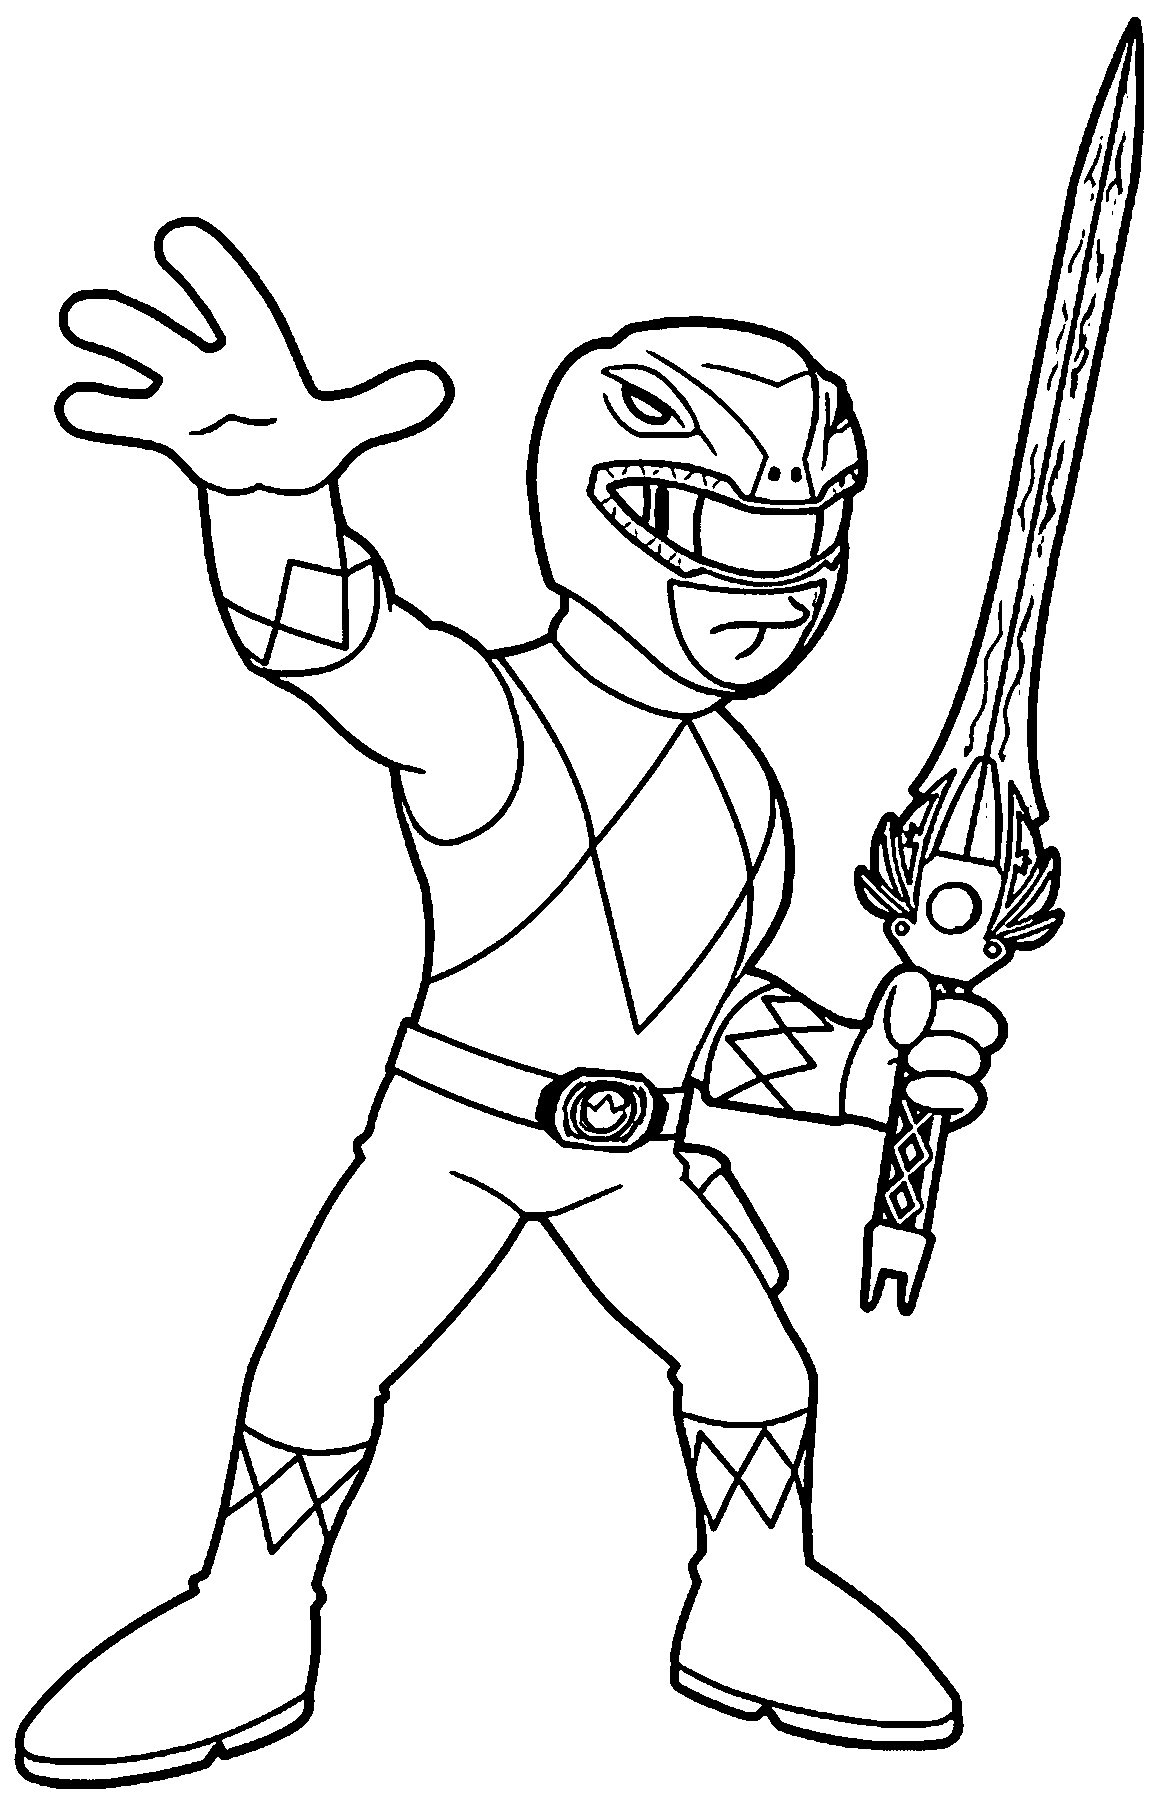 power ranger coloring pages power rangers megazord coloring pages getcoloringpagescom coloring pages power ranger 